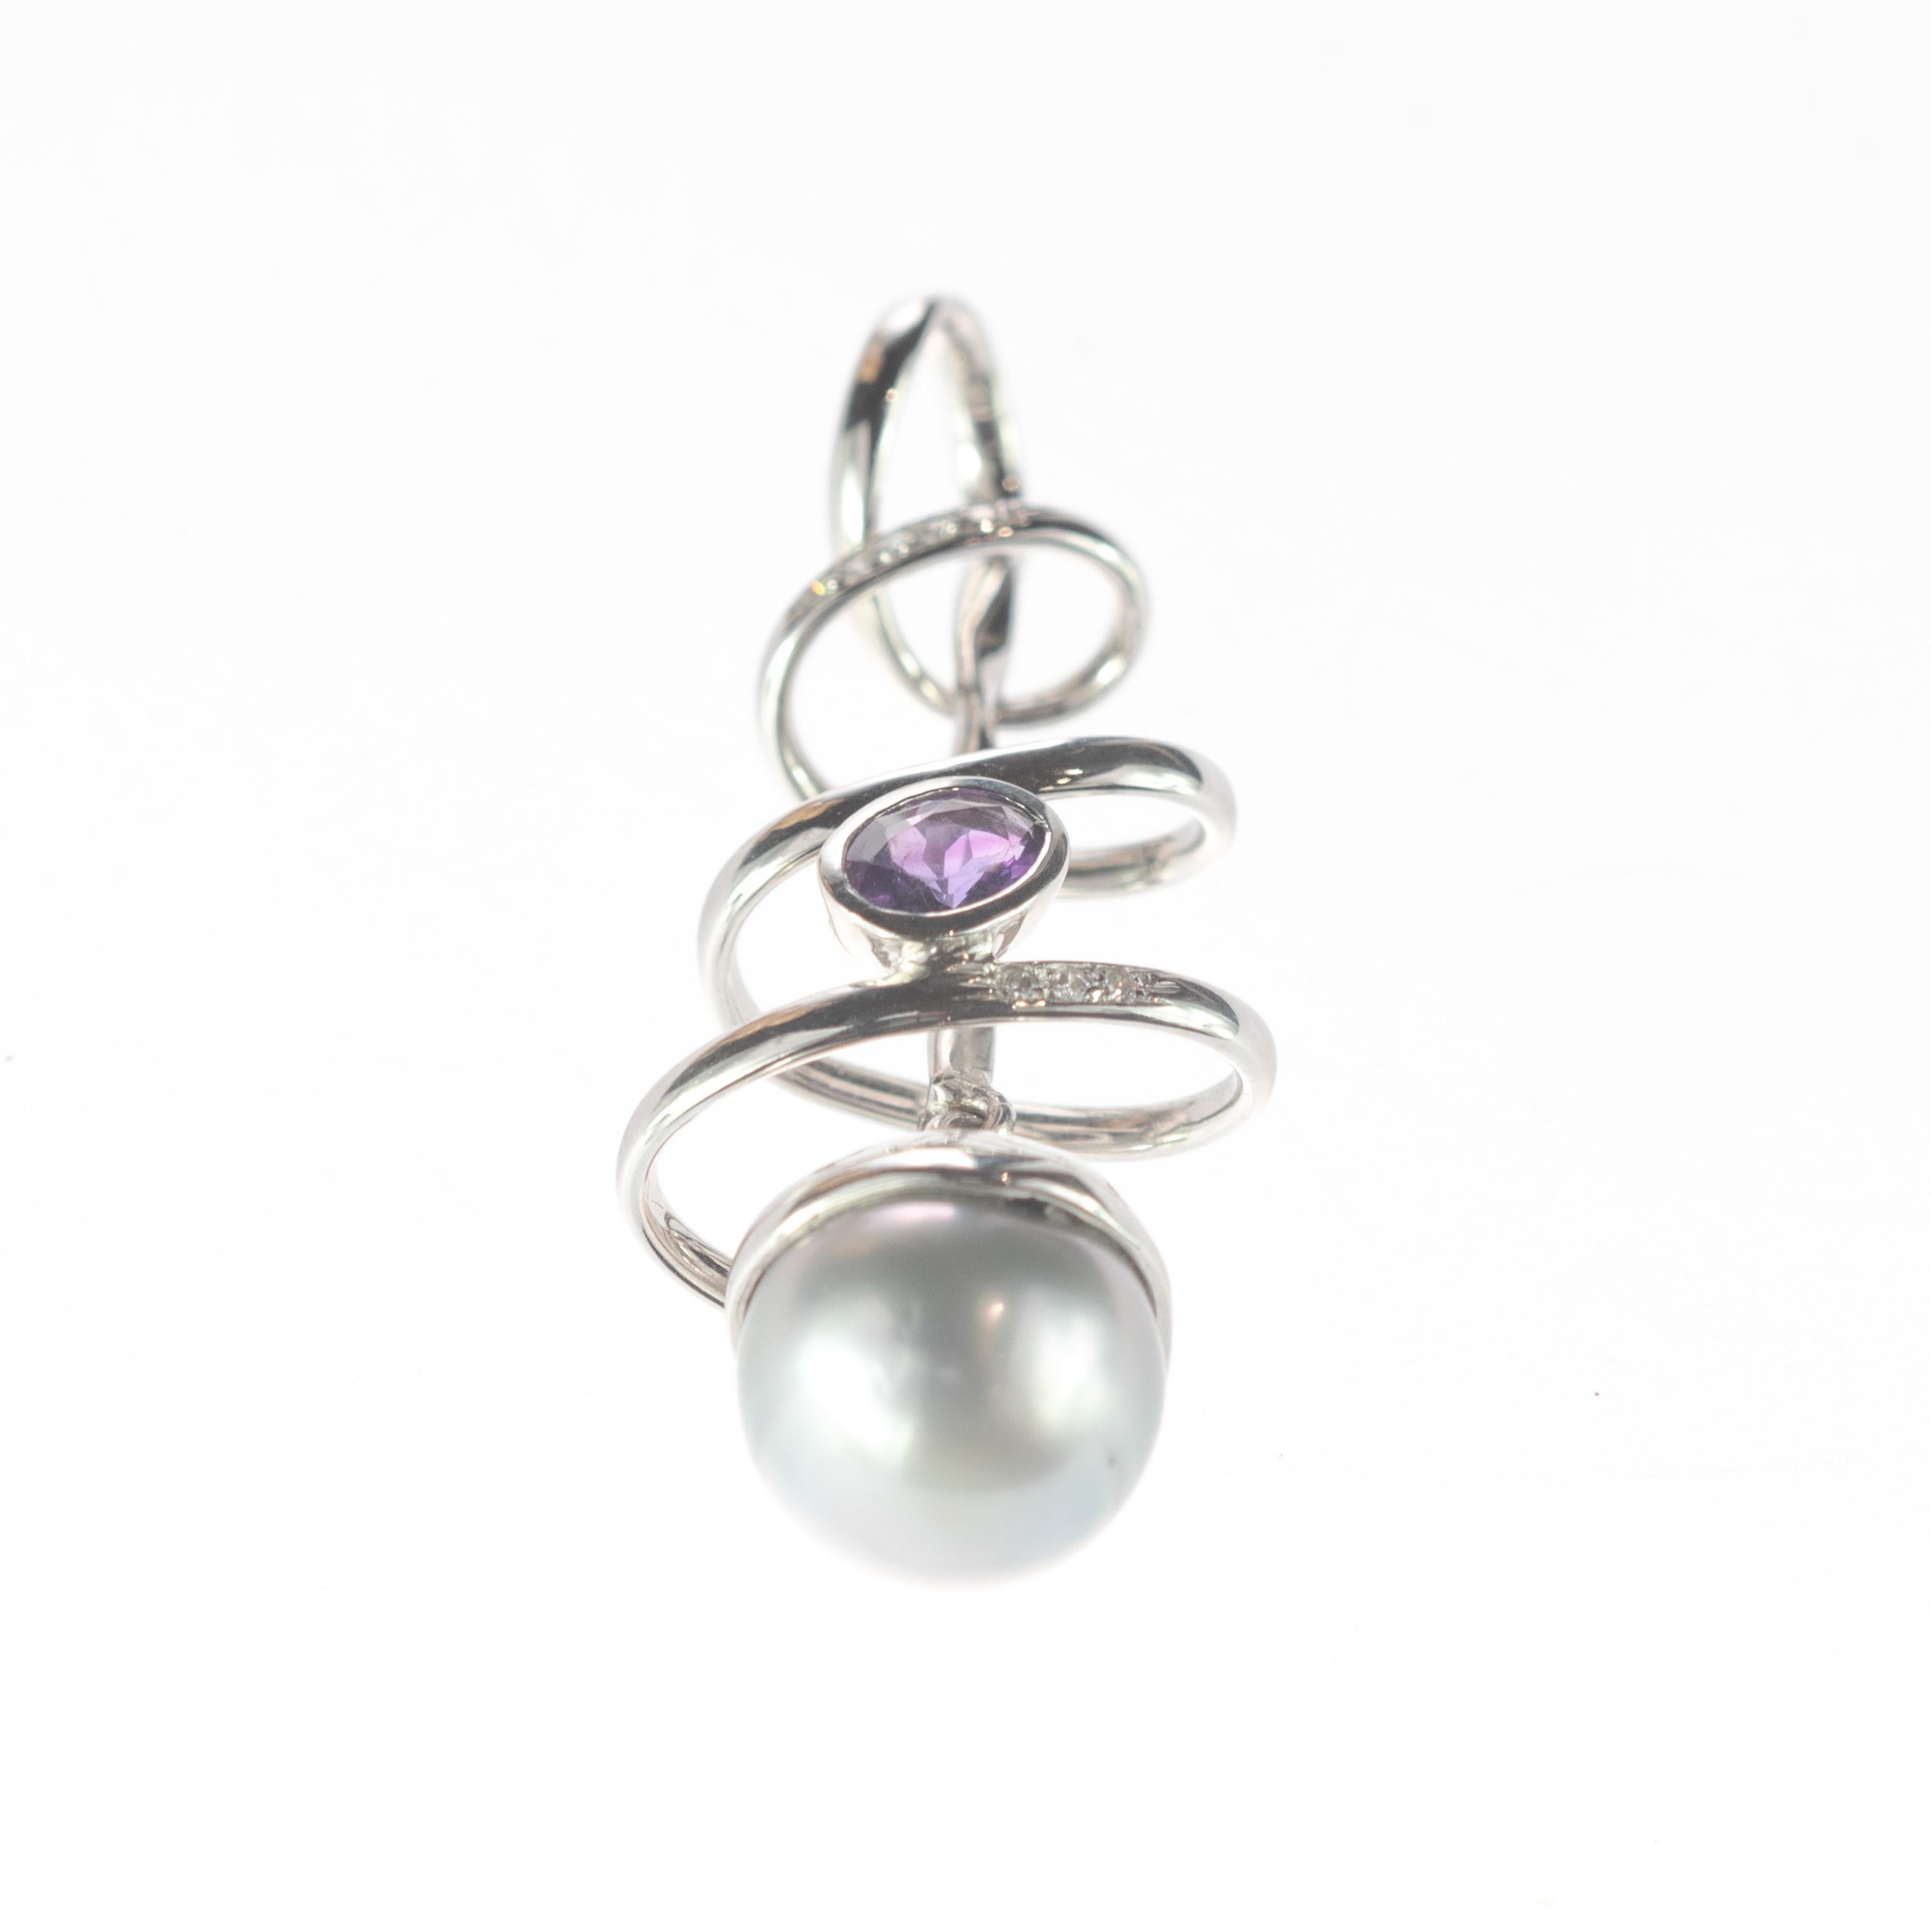 A unique and mysterious necklace pendant. Beautiful Tahitian pearl surrounded by a spiral-shaped 18 karat white gold that has an oval-shaped amethyst stone inside.  The jewel is embellished with 3 diamonds. A special design created by our italian